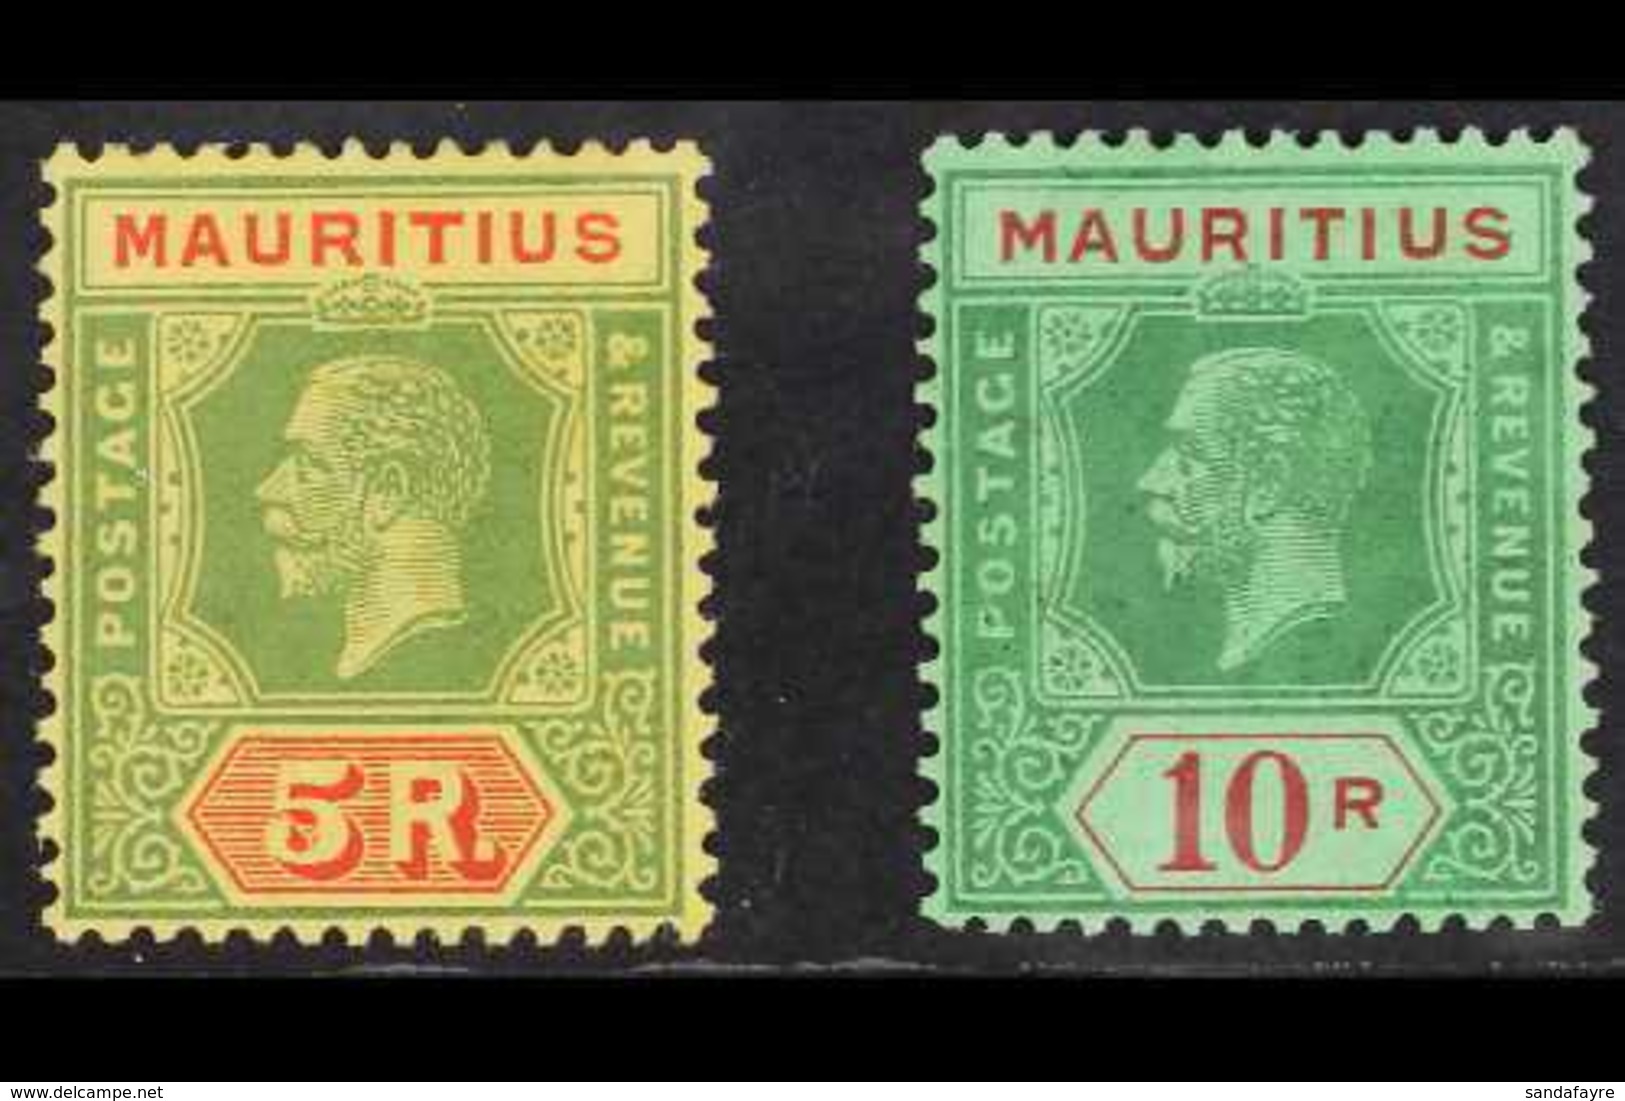 1921-34 5r And 10r Top Values, Die II, Watermark Multi Script CA, Fine Mint. (2 Stamps) For More Images, Please Visit Ht - Mauritius (...-1967)